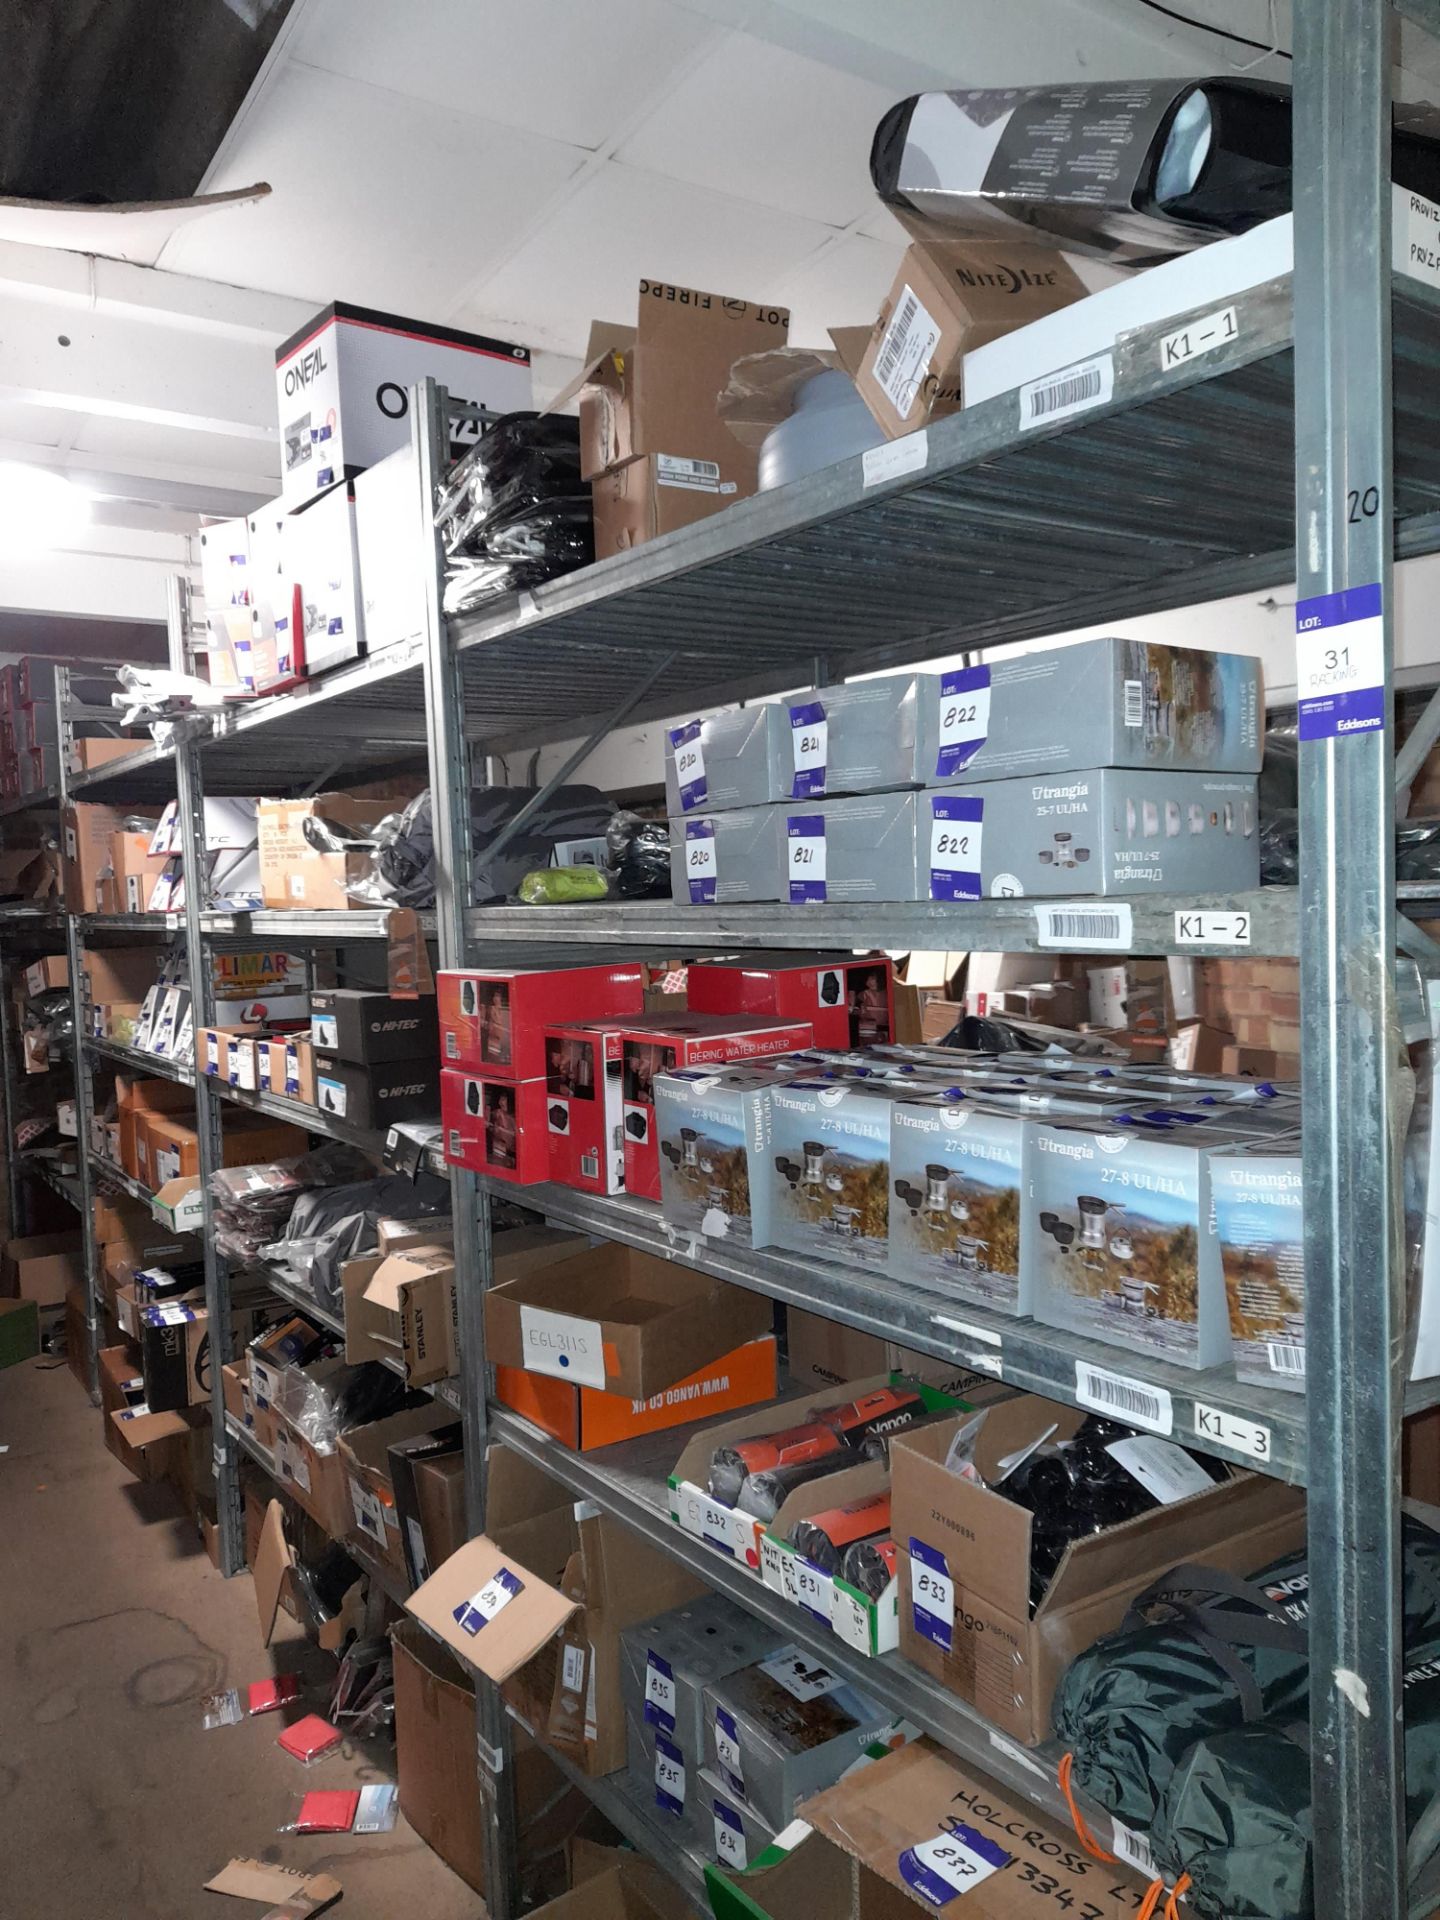 9 x Bays of Metal Shelving, located to Mezzanine (4 x Approx. 1600W x 2500H x 830D, and 5 x